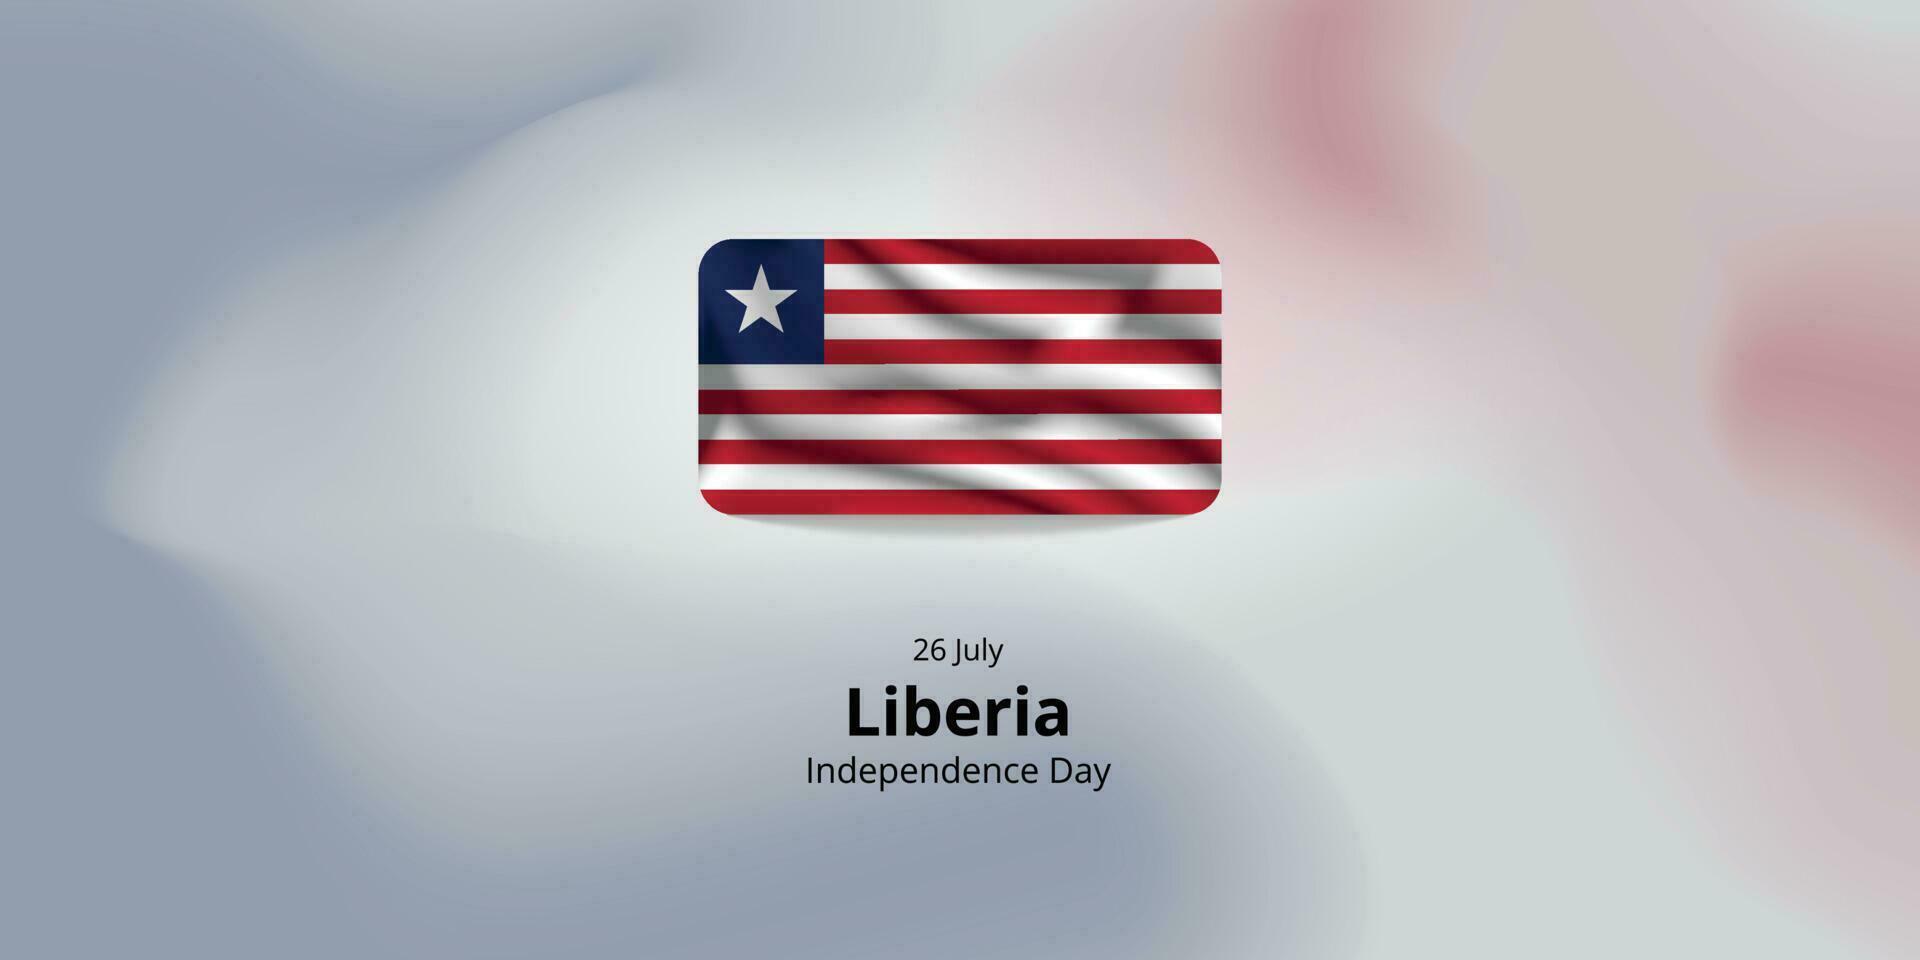 Liberia independence day celebration, use for banner, social media vector